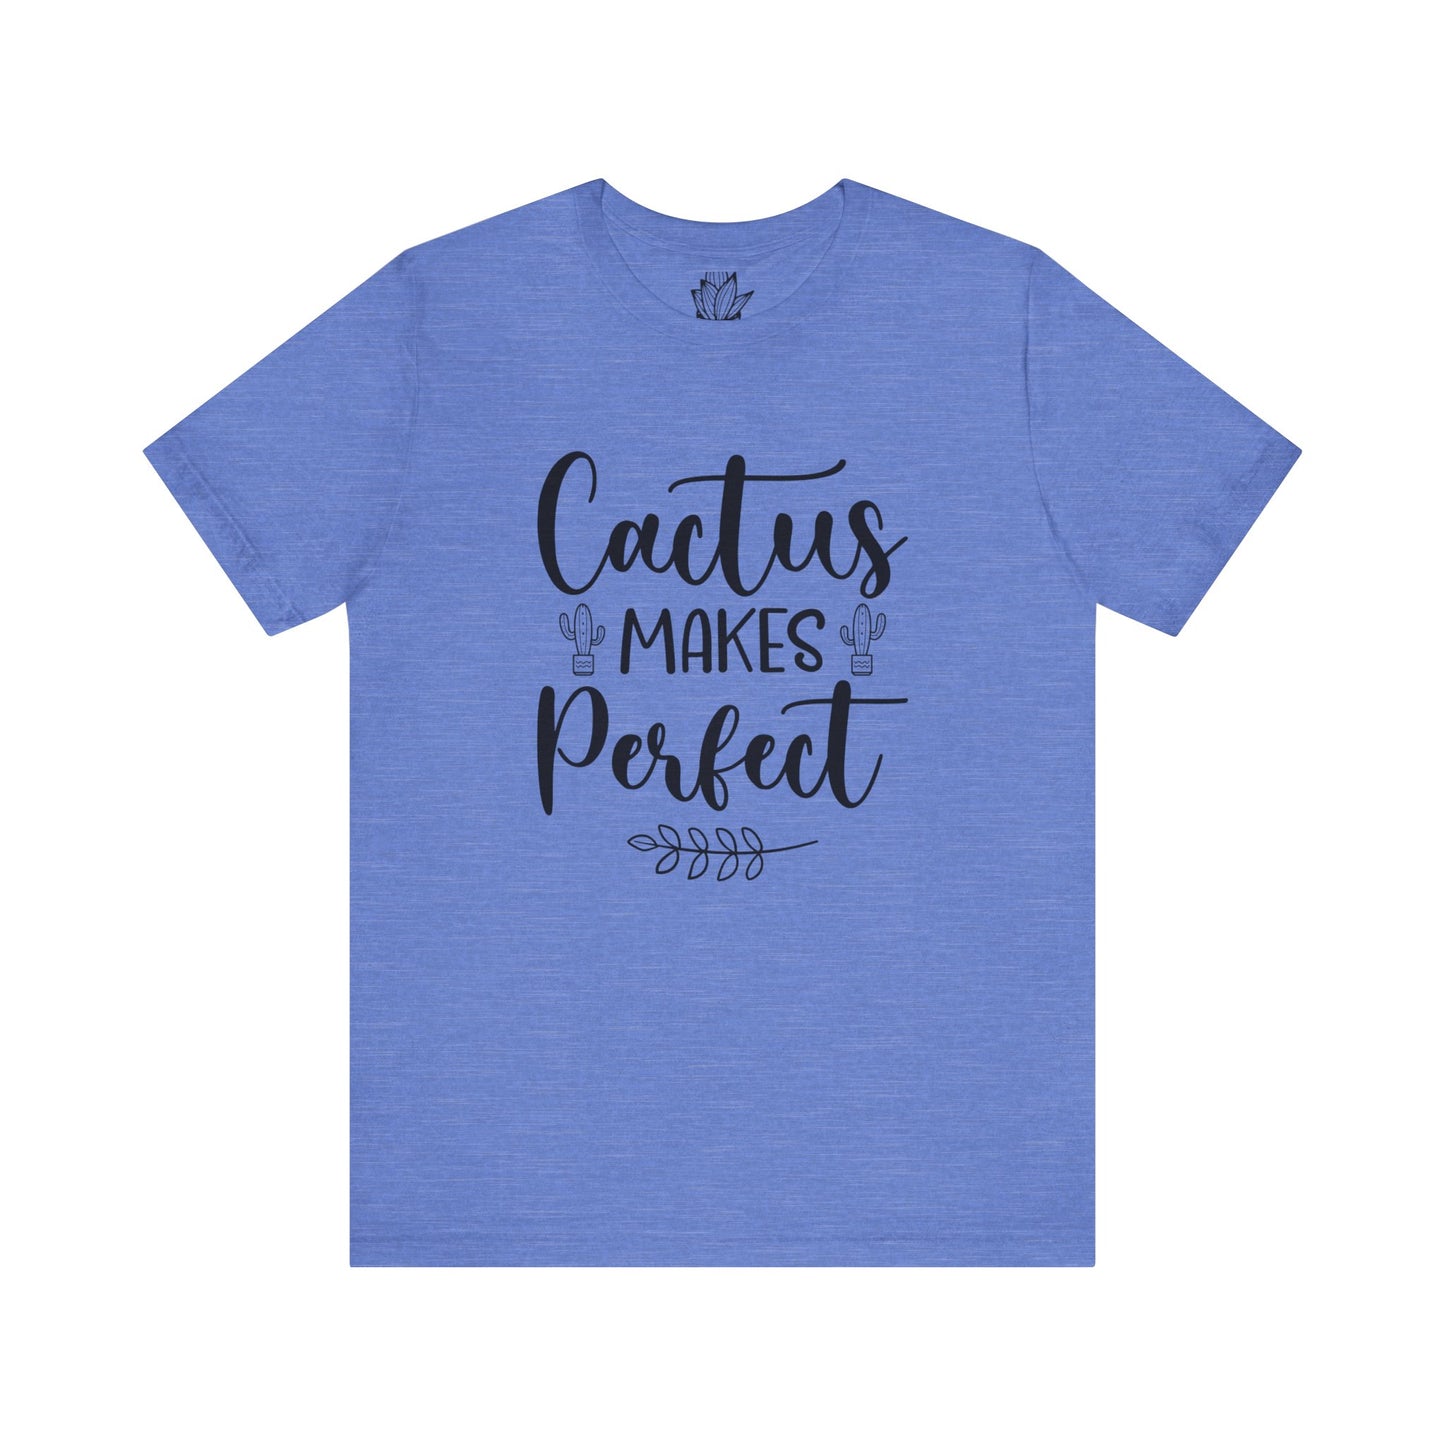 Cactus Makes Perfect Jersey Short Sleeve Tee